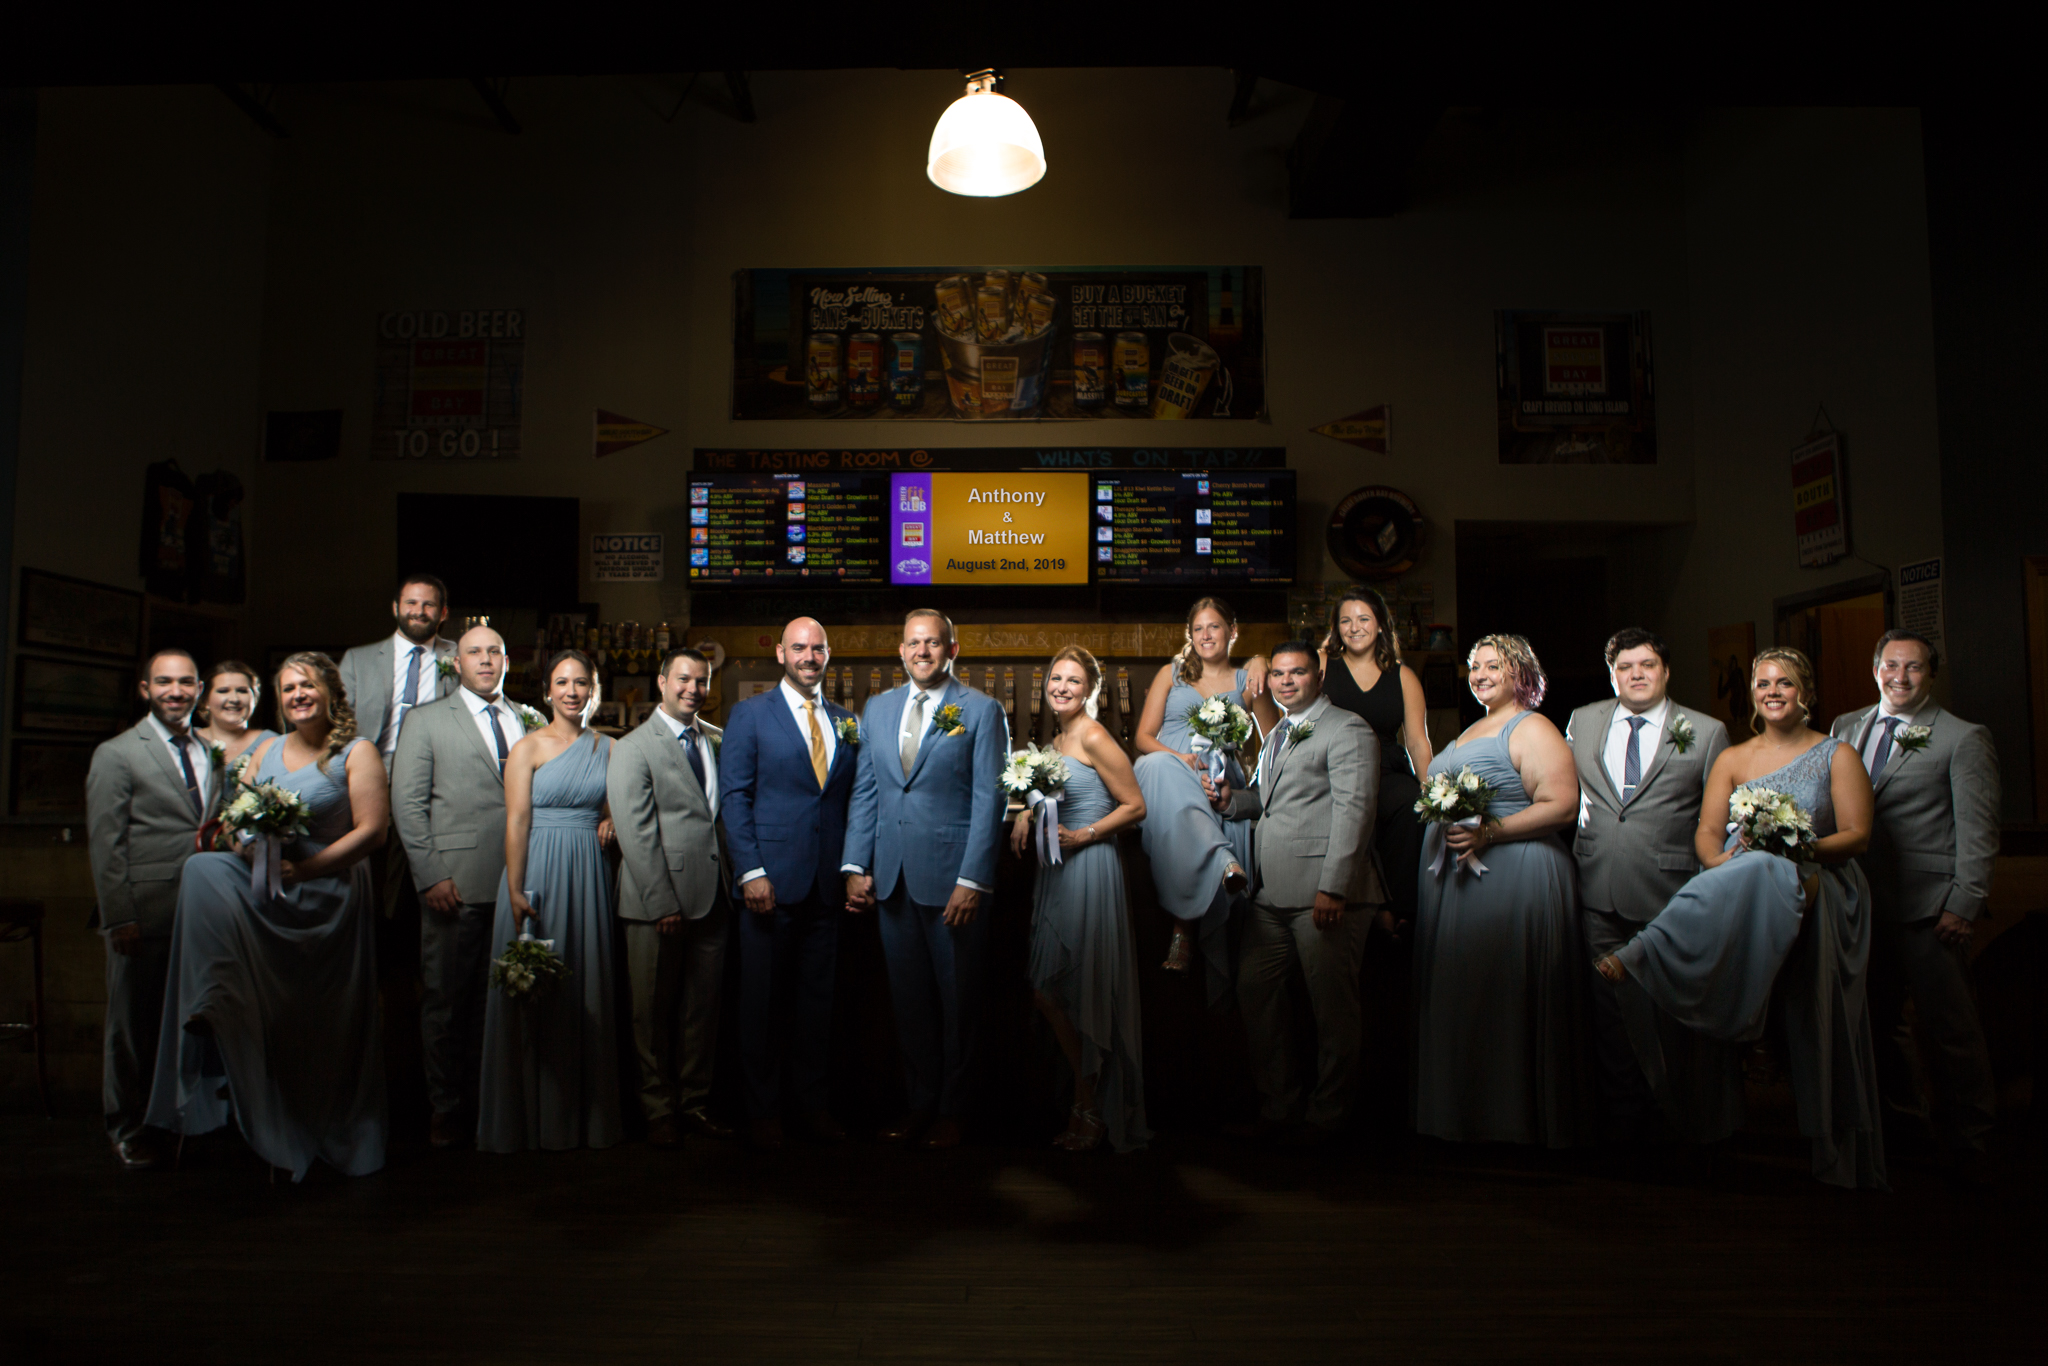 Wedding Party Archives - Equally Wed - LGBTQ+ Wedding